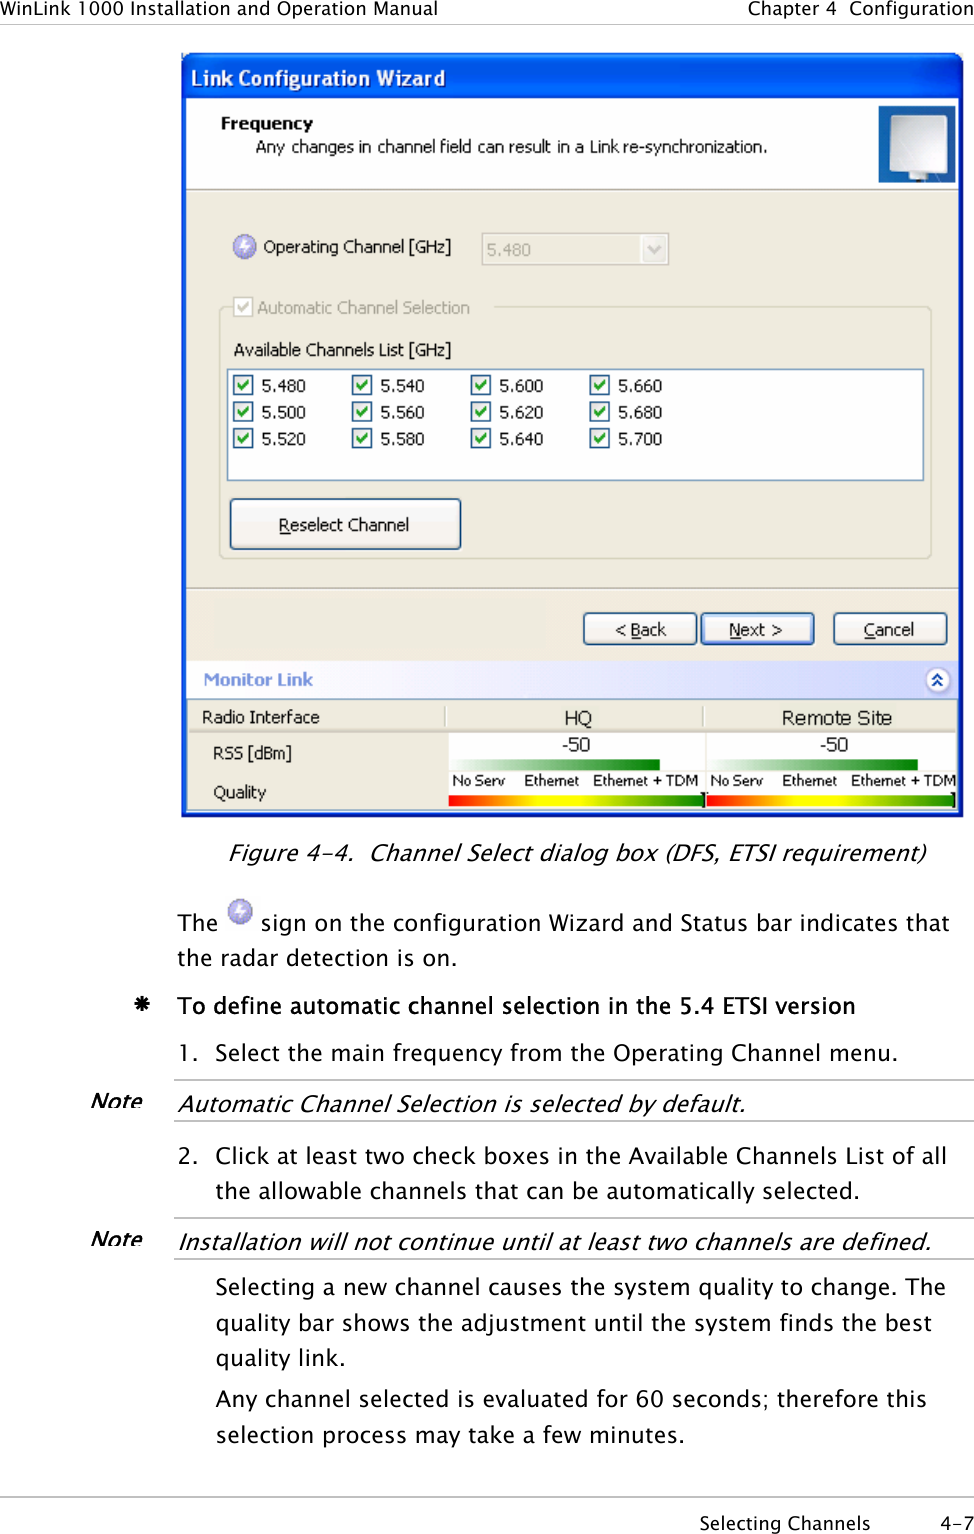 WinLink 1000 Installation and Operation Manual  Chapter  4  Configuration  Figure  4-4.  Channel Select dialog box (DFS, ETSI requirement) The  sign on the configuration Wizard and Status bar indicates that the radar detection is on. Æ To define automatic channel selection in the 5.4 ETSI version 1. Select the main frequency from the Operating Channel menu.  NoteAutomatic Channel Selection is selected by default.  2. Click at least two check boxes in the Available Channels List of all the allowable channels that can be automatically selected.  NoteInstallation will not continue until at least two channels are defined.  Selecting a new channel causes the system quality to change. The quality bar shows the adjustment until the system finds the best quality link.  Any channel selected is evaluated for 60 seconds; therefore this selection process may take a few minutes.  Selecting Channels  4-7 